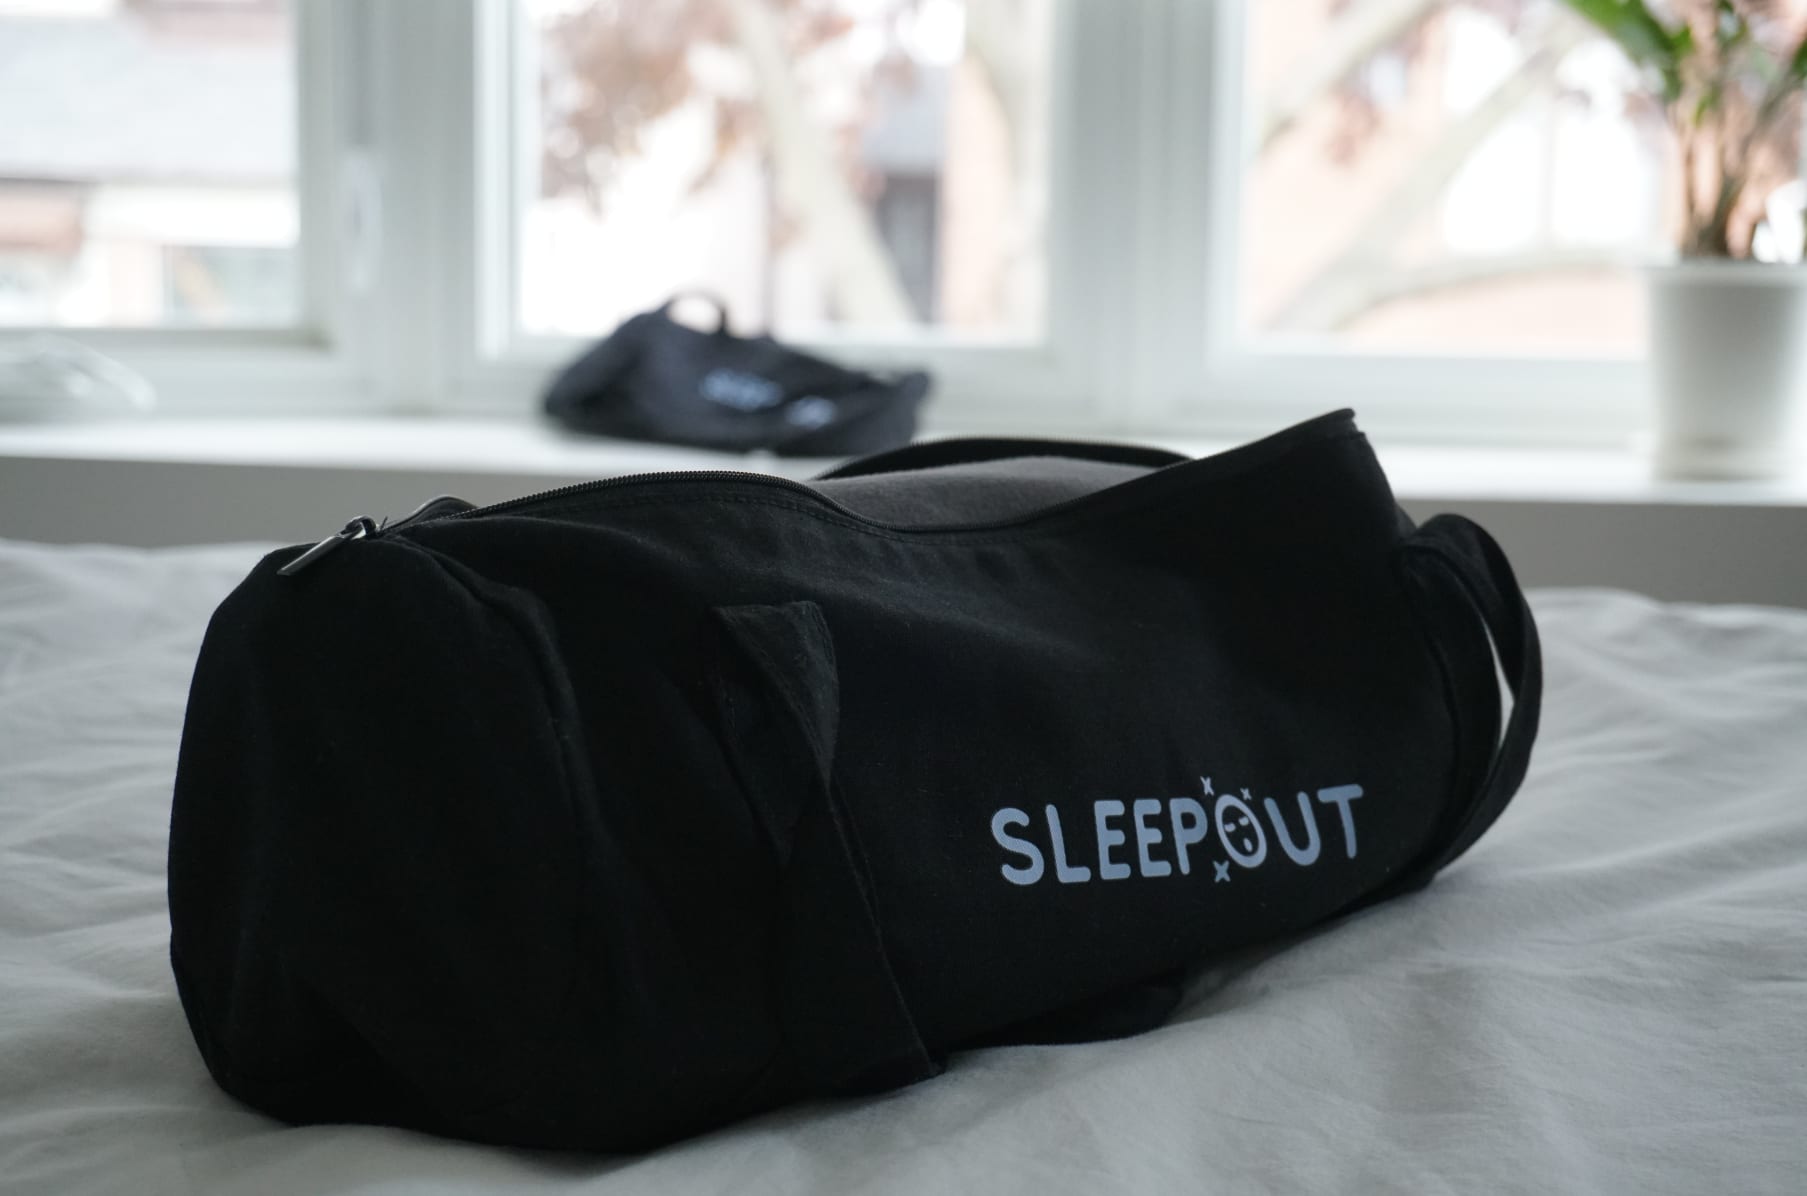 The Official Sleepout® Portable Blackout Curtain 2.0